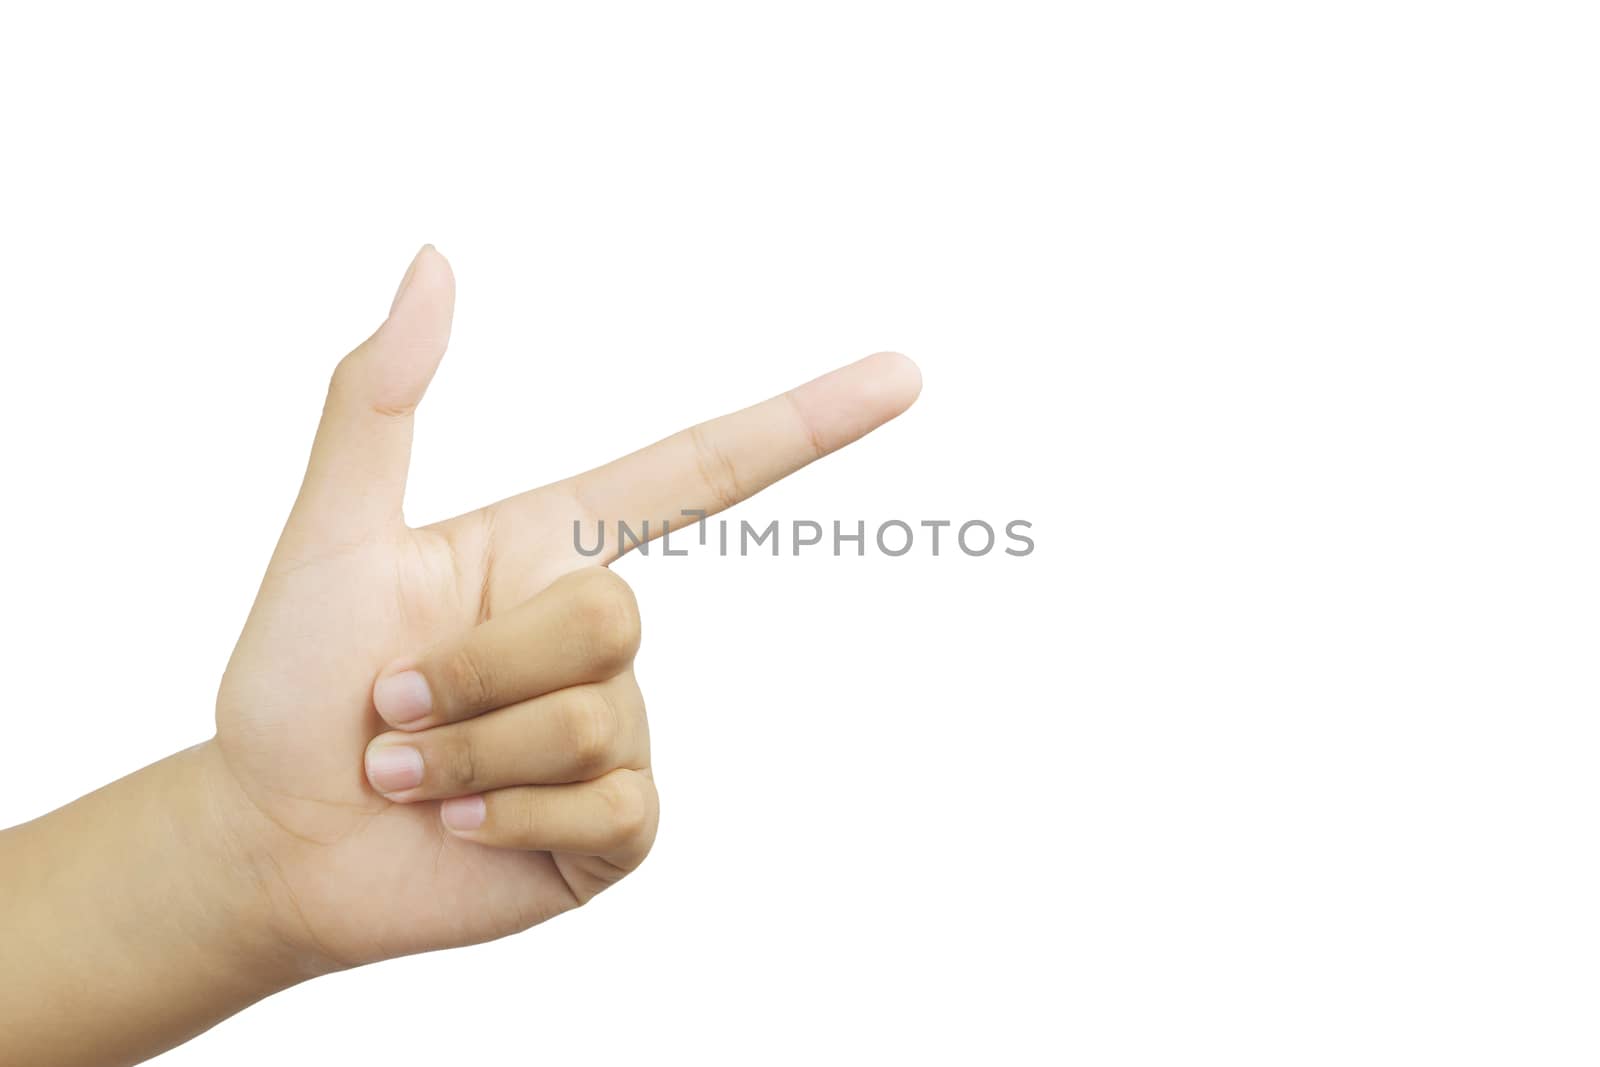 Human simulating pressing button, with clipping path